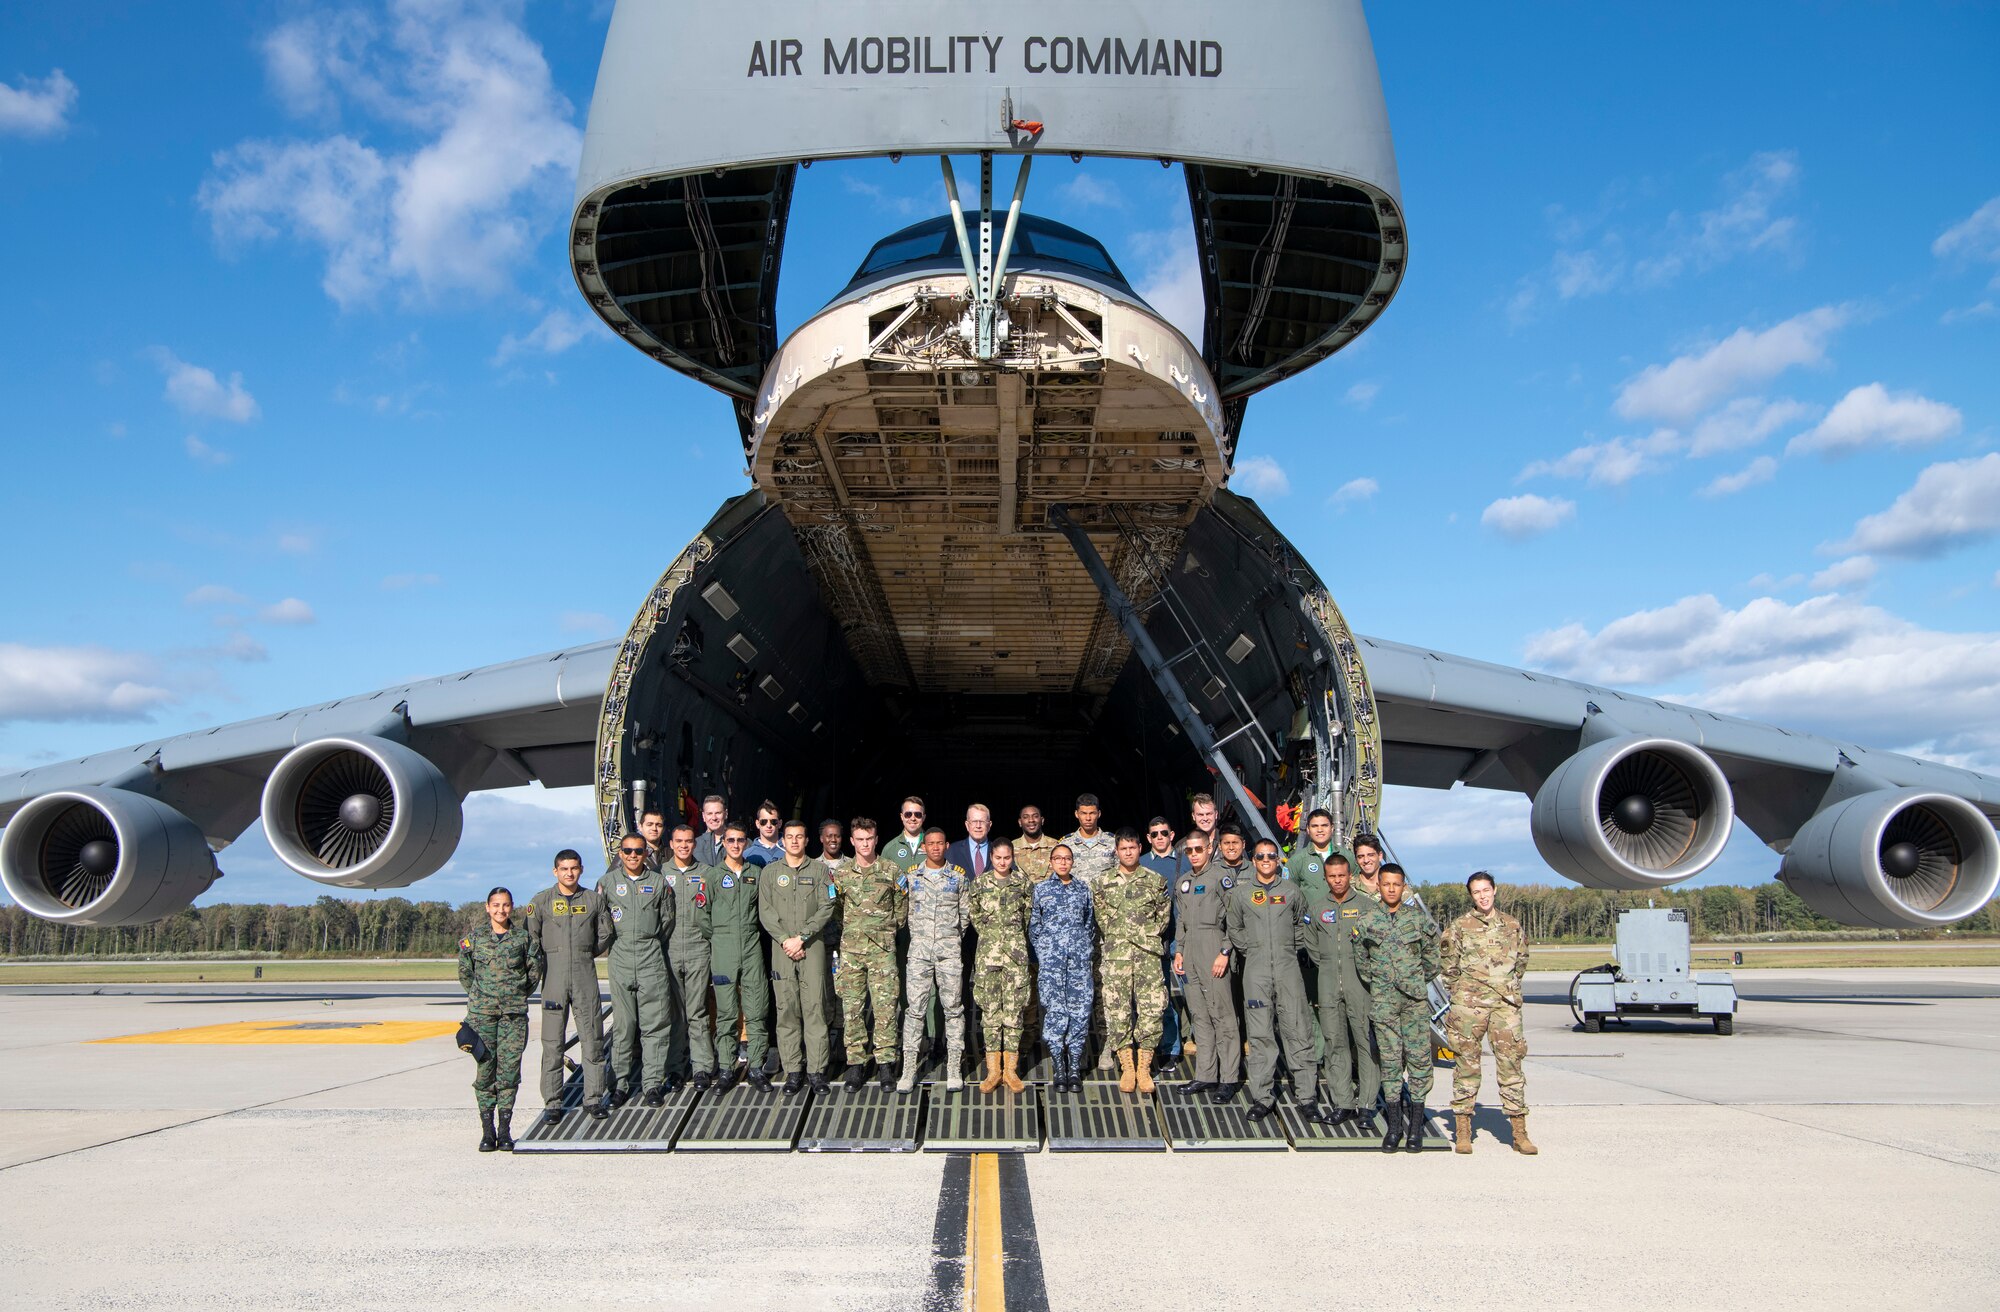 Latin American cadets, hosts from the Secretary of the Air Force's office of international affairs and personnel from the 436th Airlift Wing pose in front of a C-5M Super Galaxy during a tour of the aircraft Oct. 17, 2019, at Dover Air Force Base, Del. The Latin American Cadet Initiative program was originally created in 2006 by the Office of the Secretary of the Air Force for International Affairs. (U.S. Air Force photo by Senior Airman Christopher Quail)